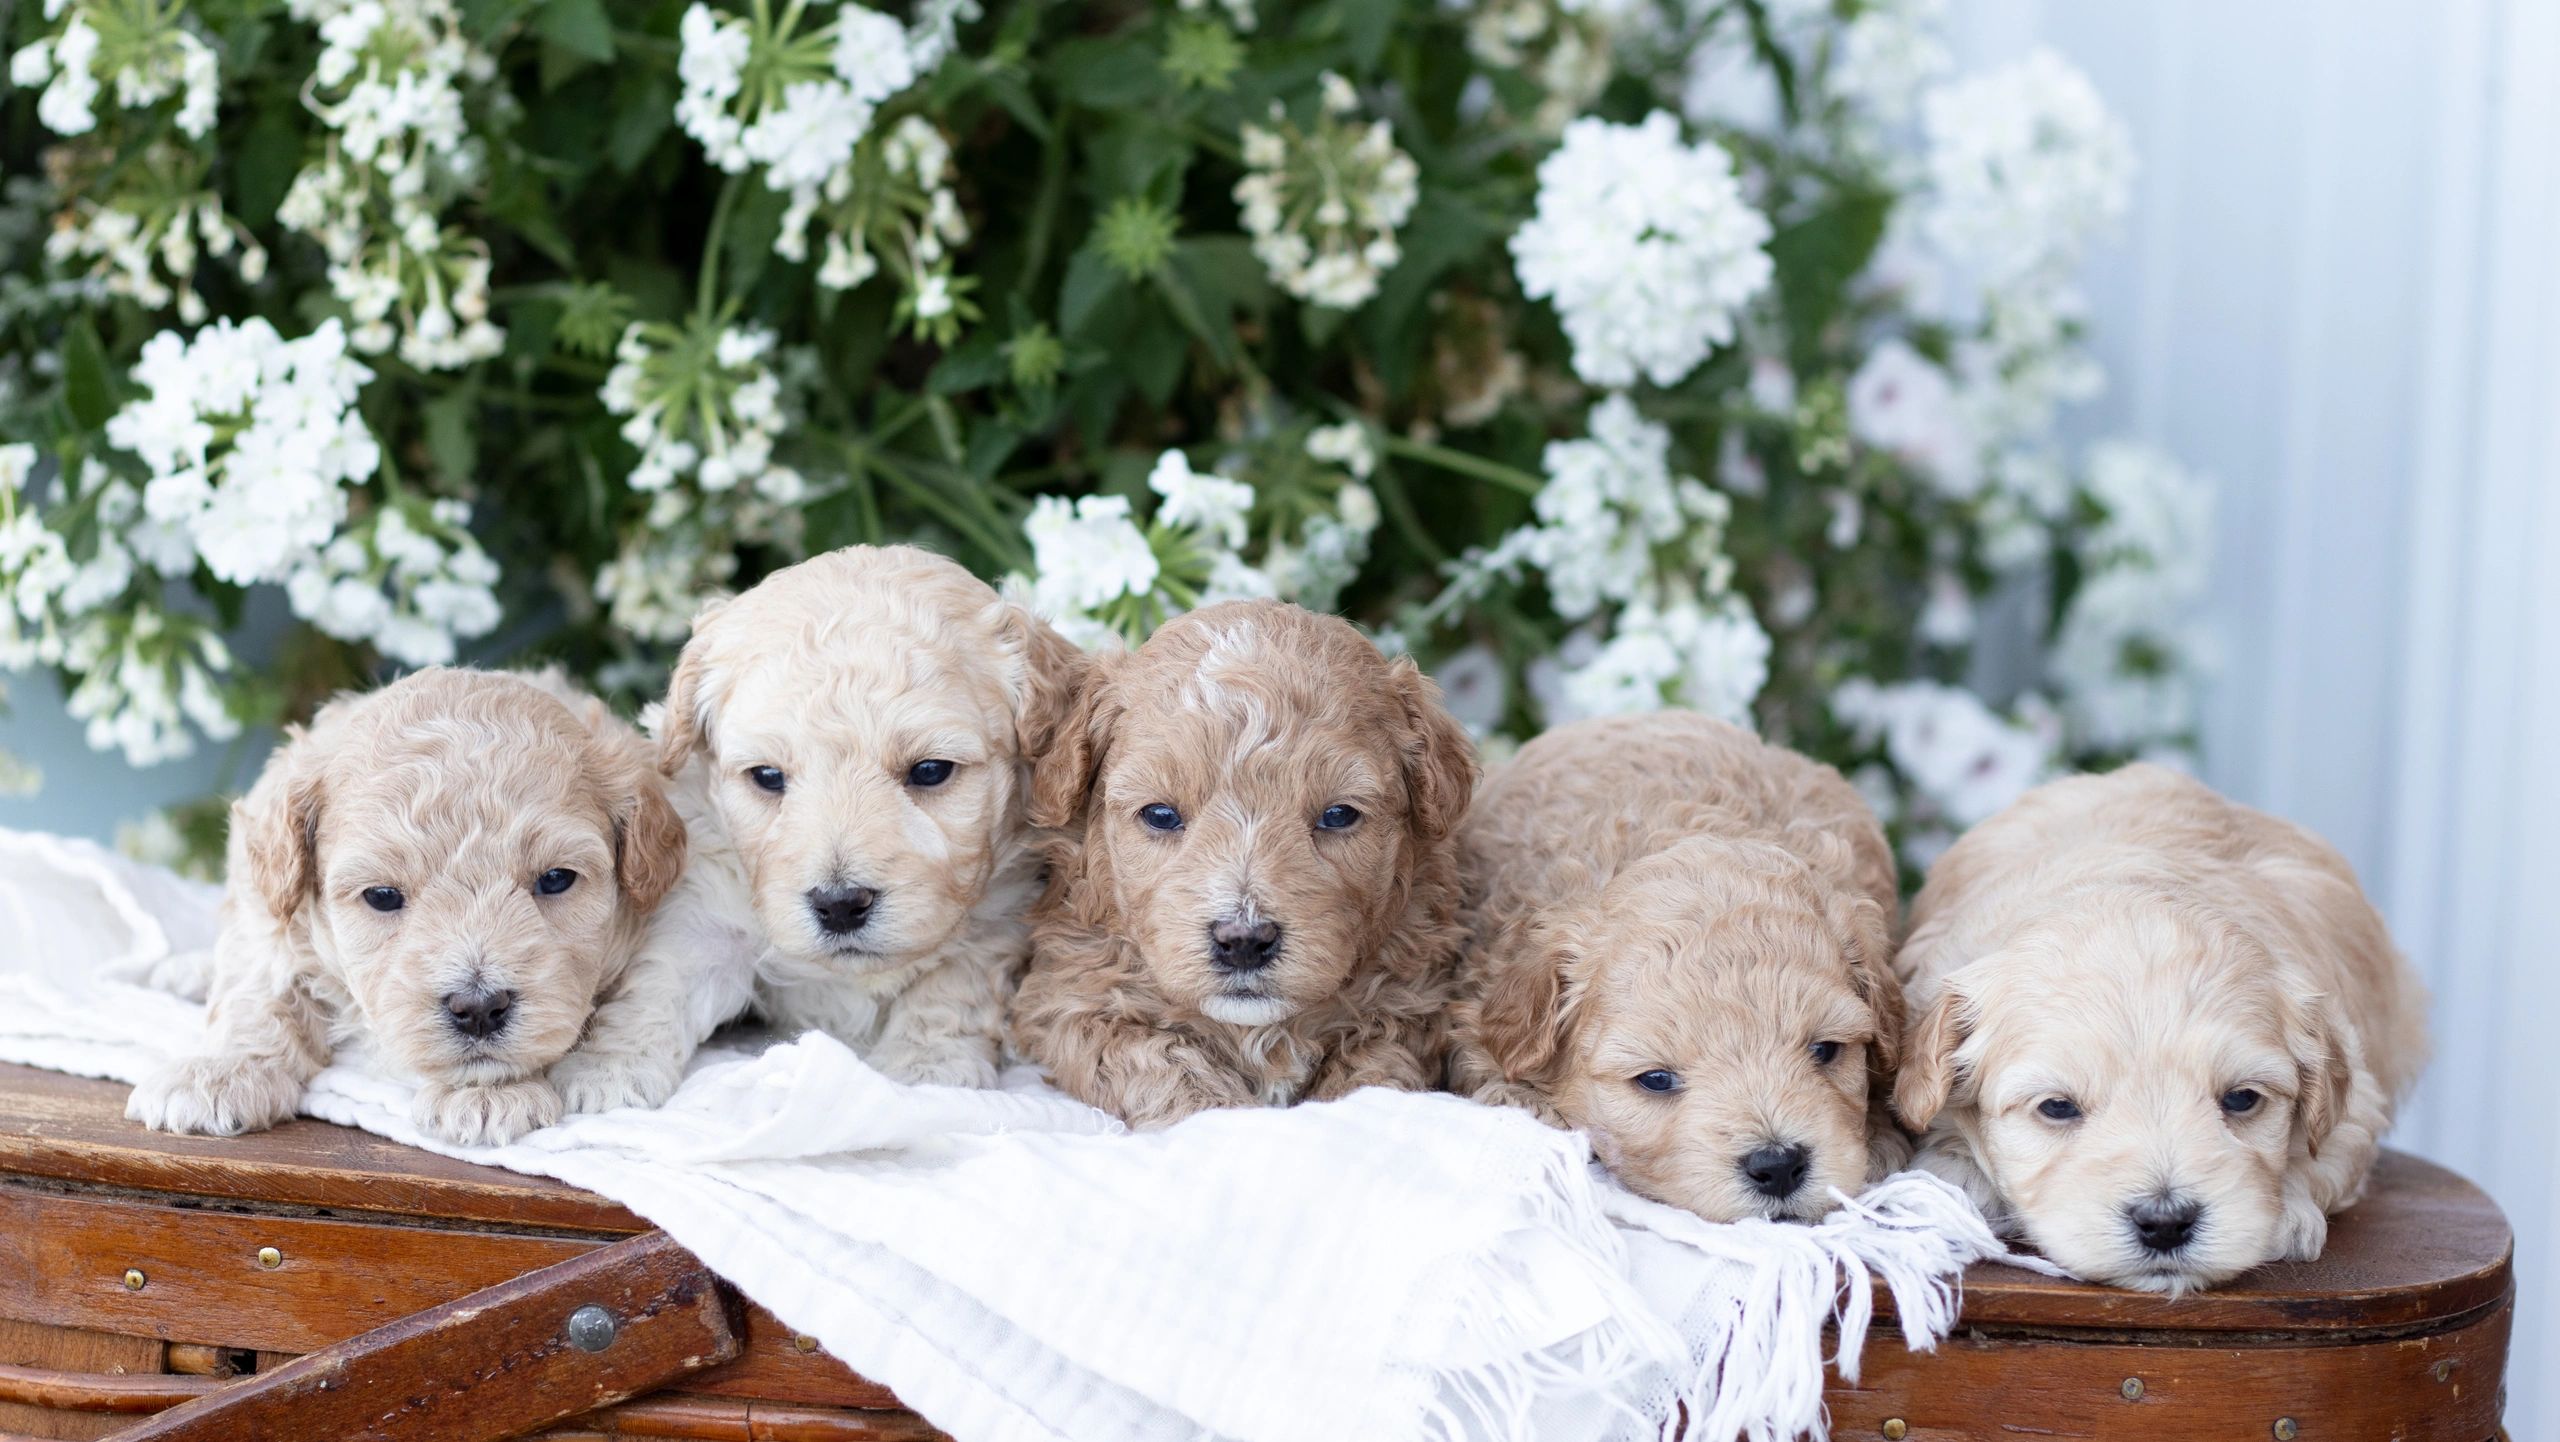 Maltipoo, shichon or Teddybear puppies laying on a blanket, shihtzu bichon mix or poodle maltese mix